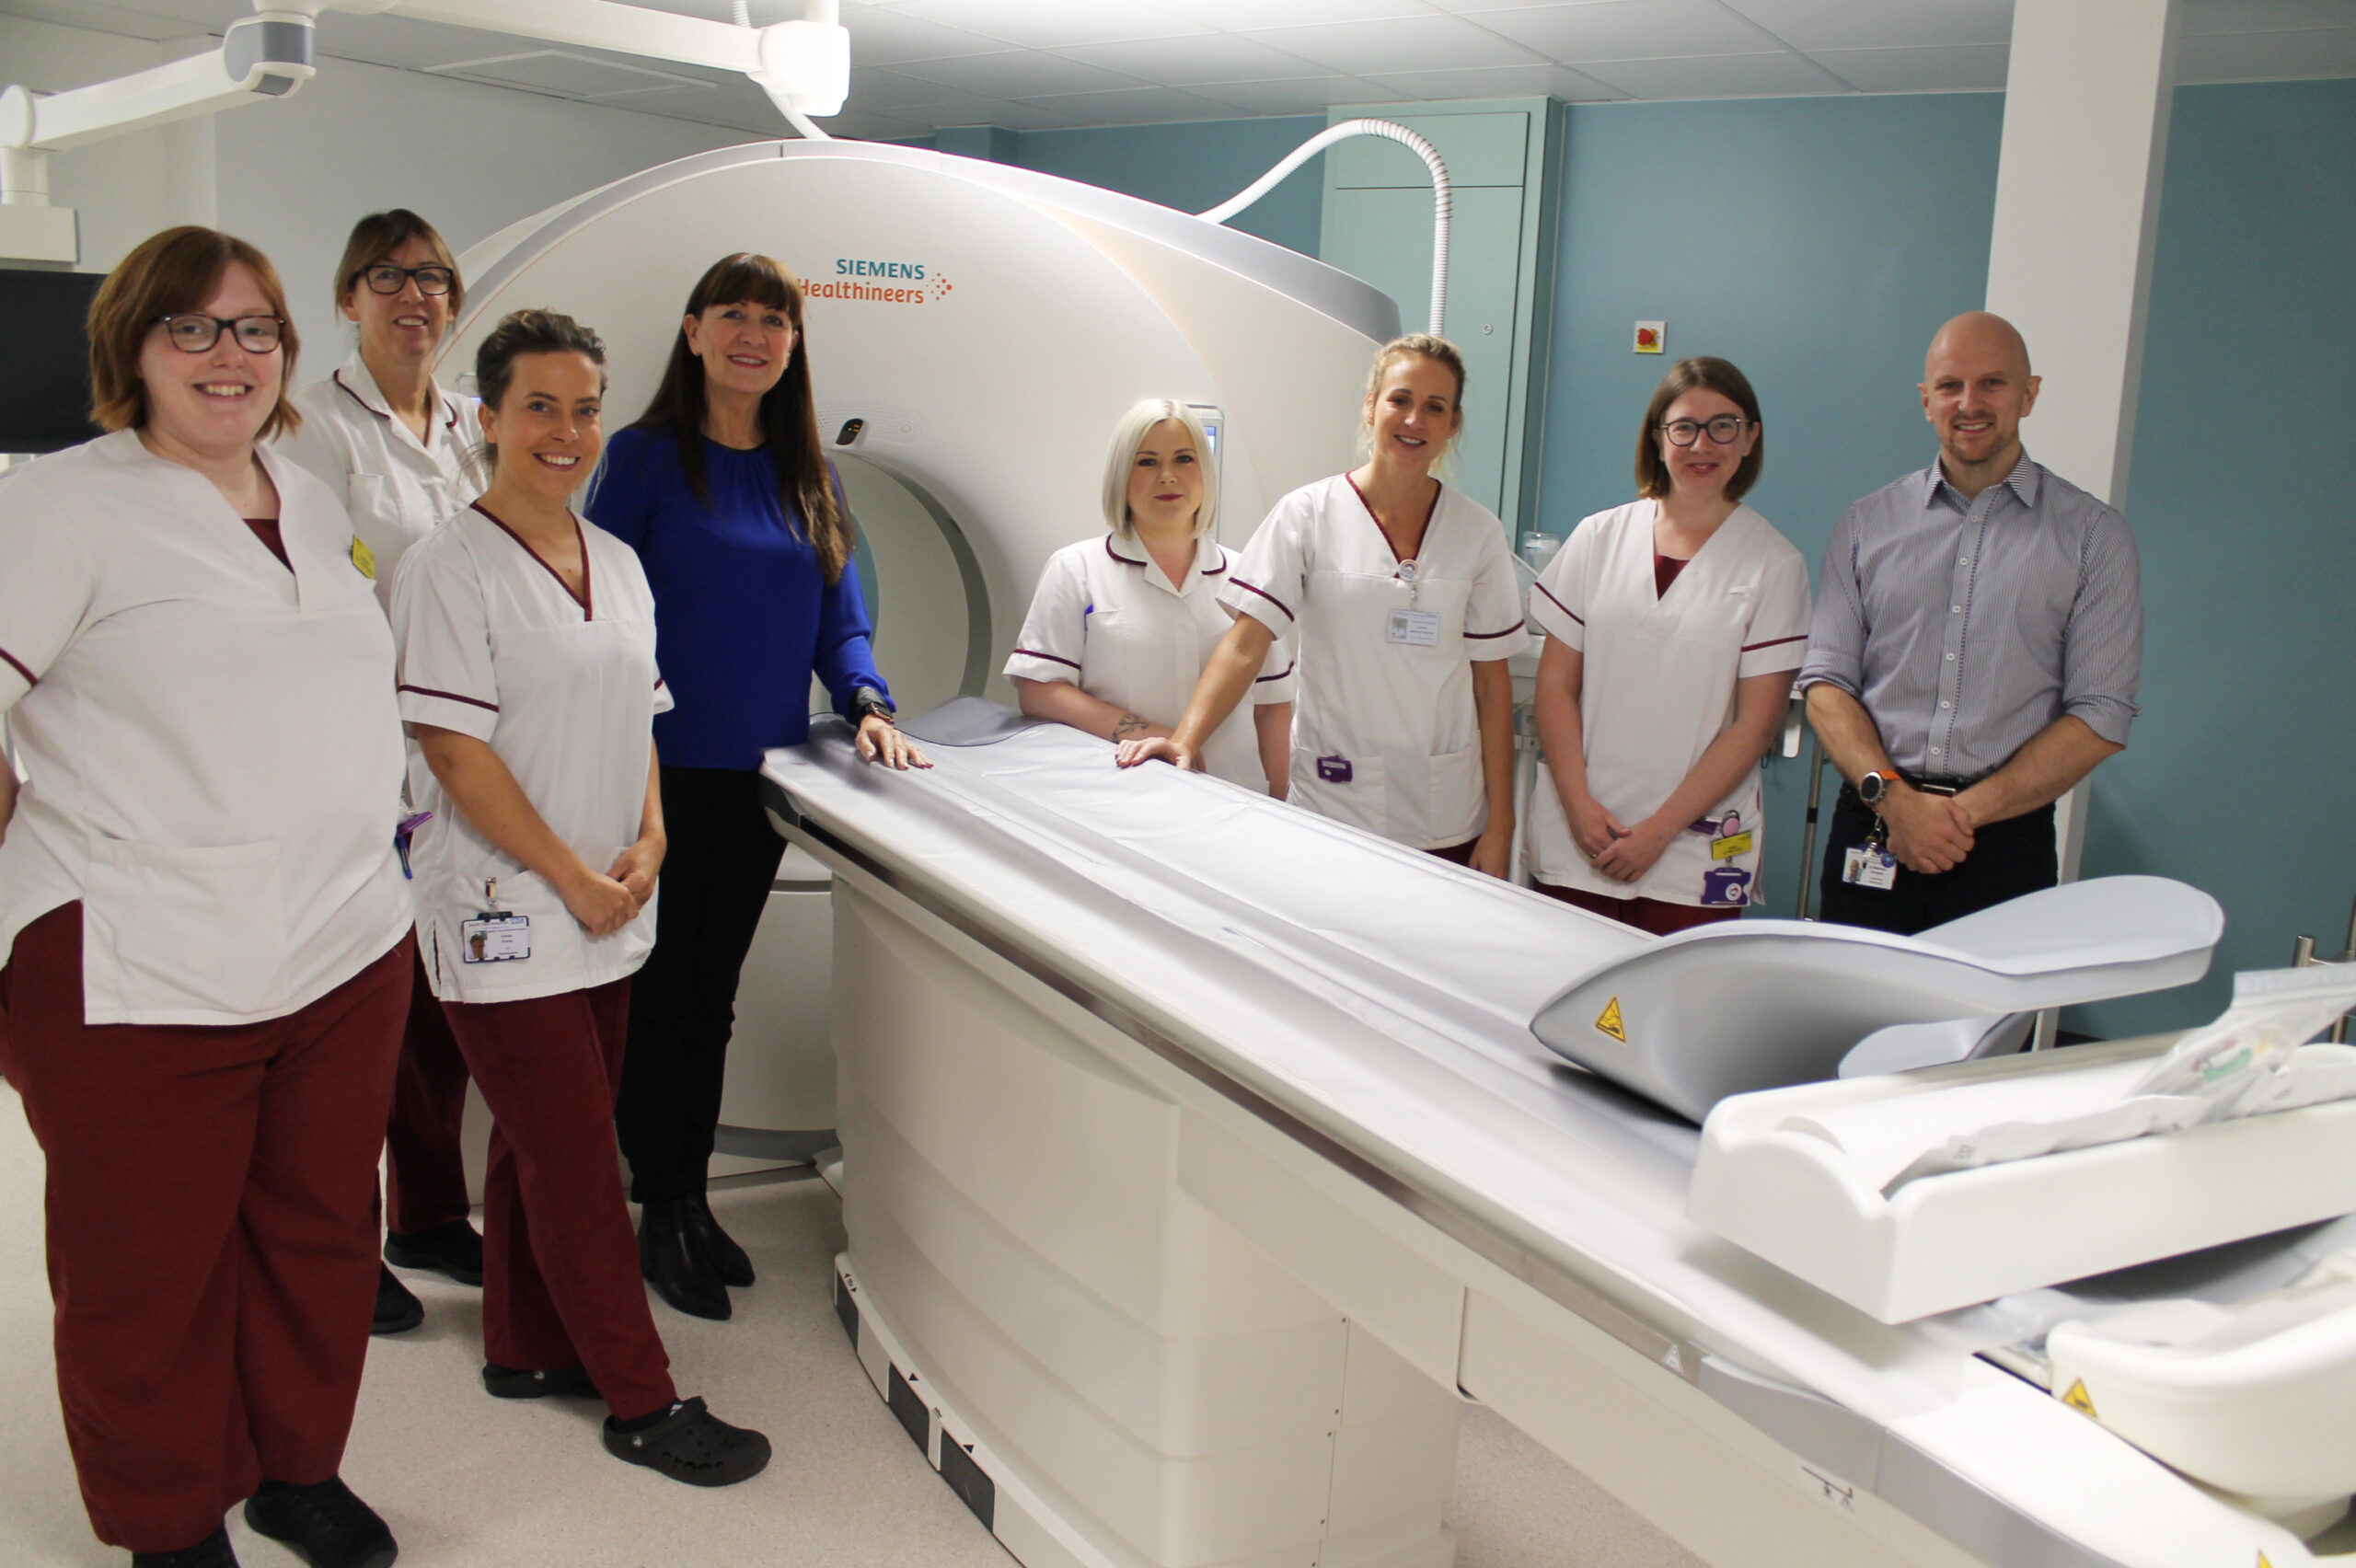 Staff from a radiology department stand in front of a CT scanner